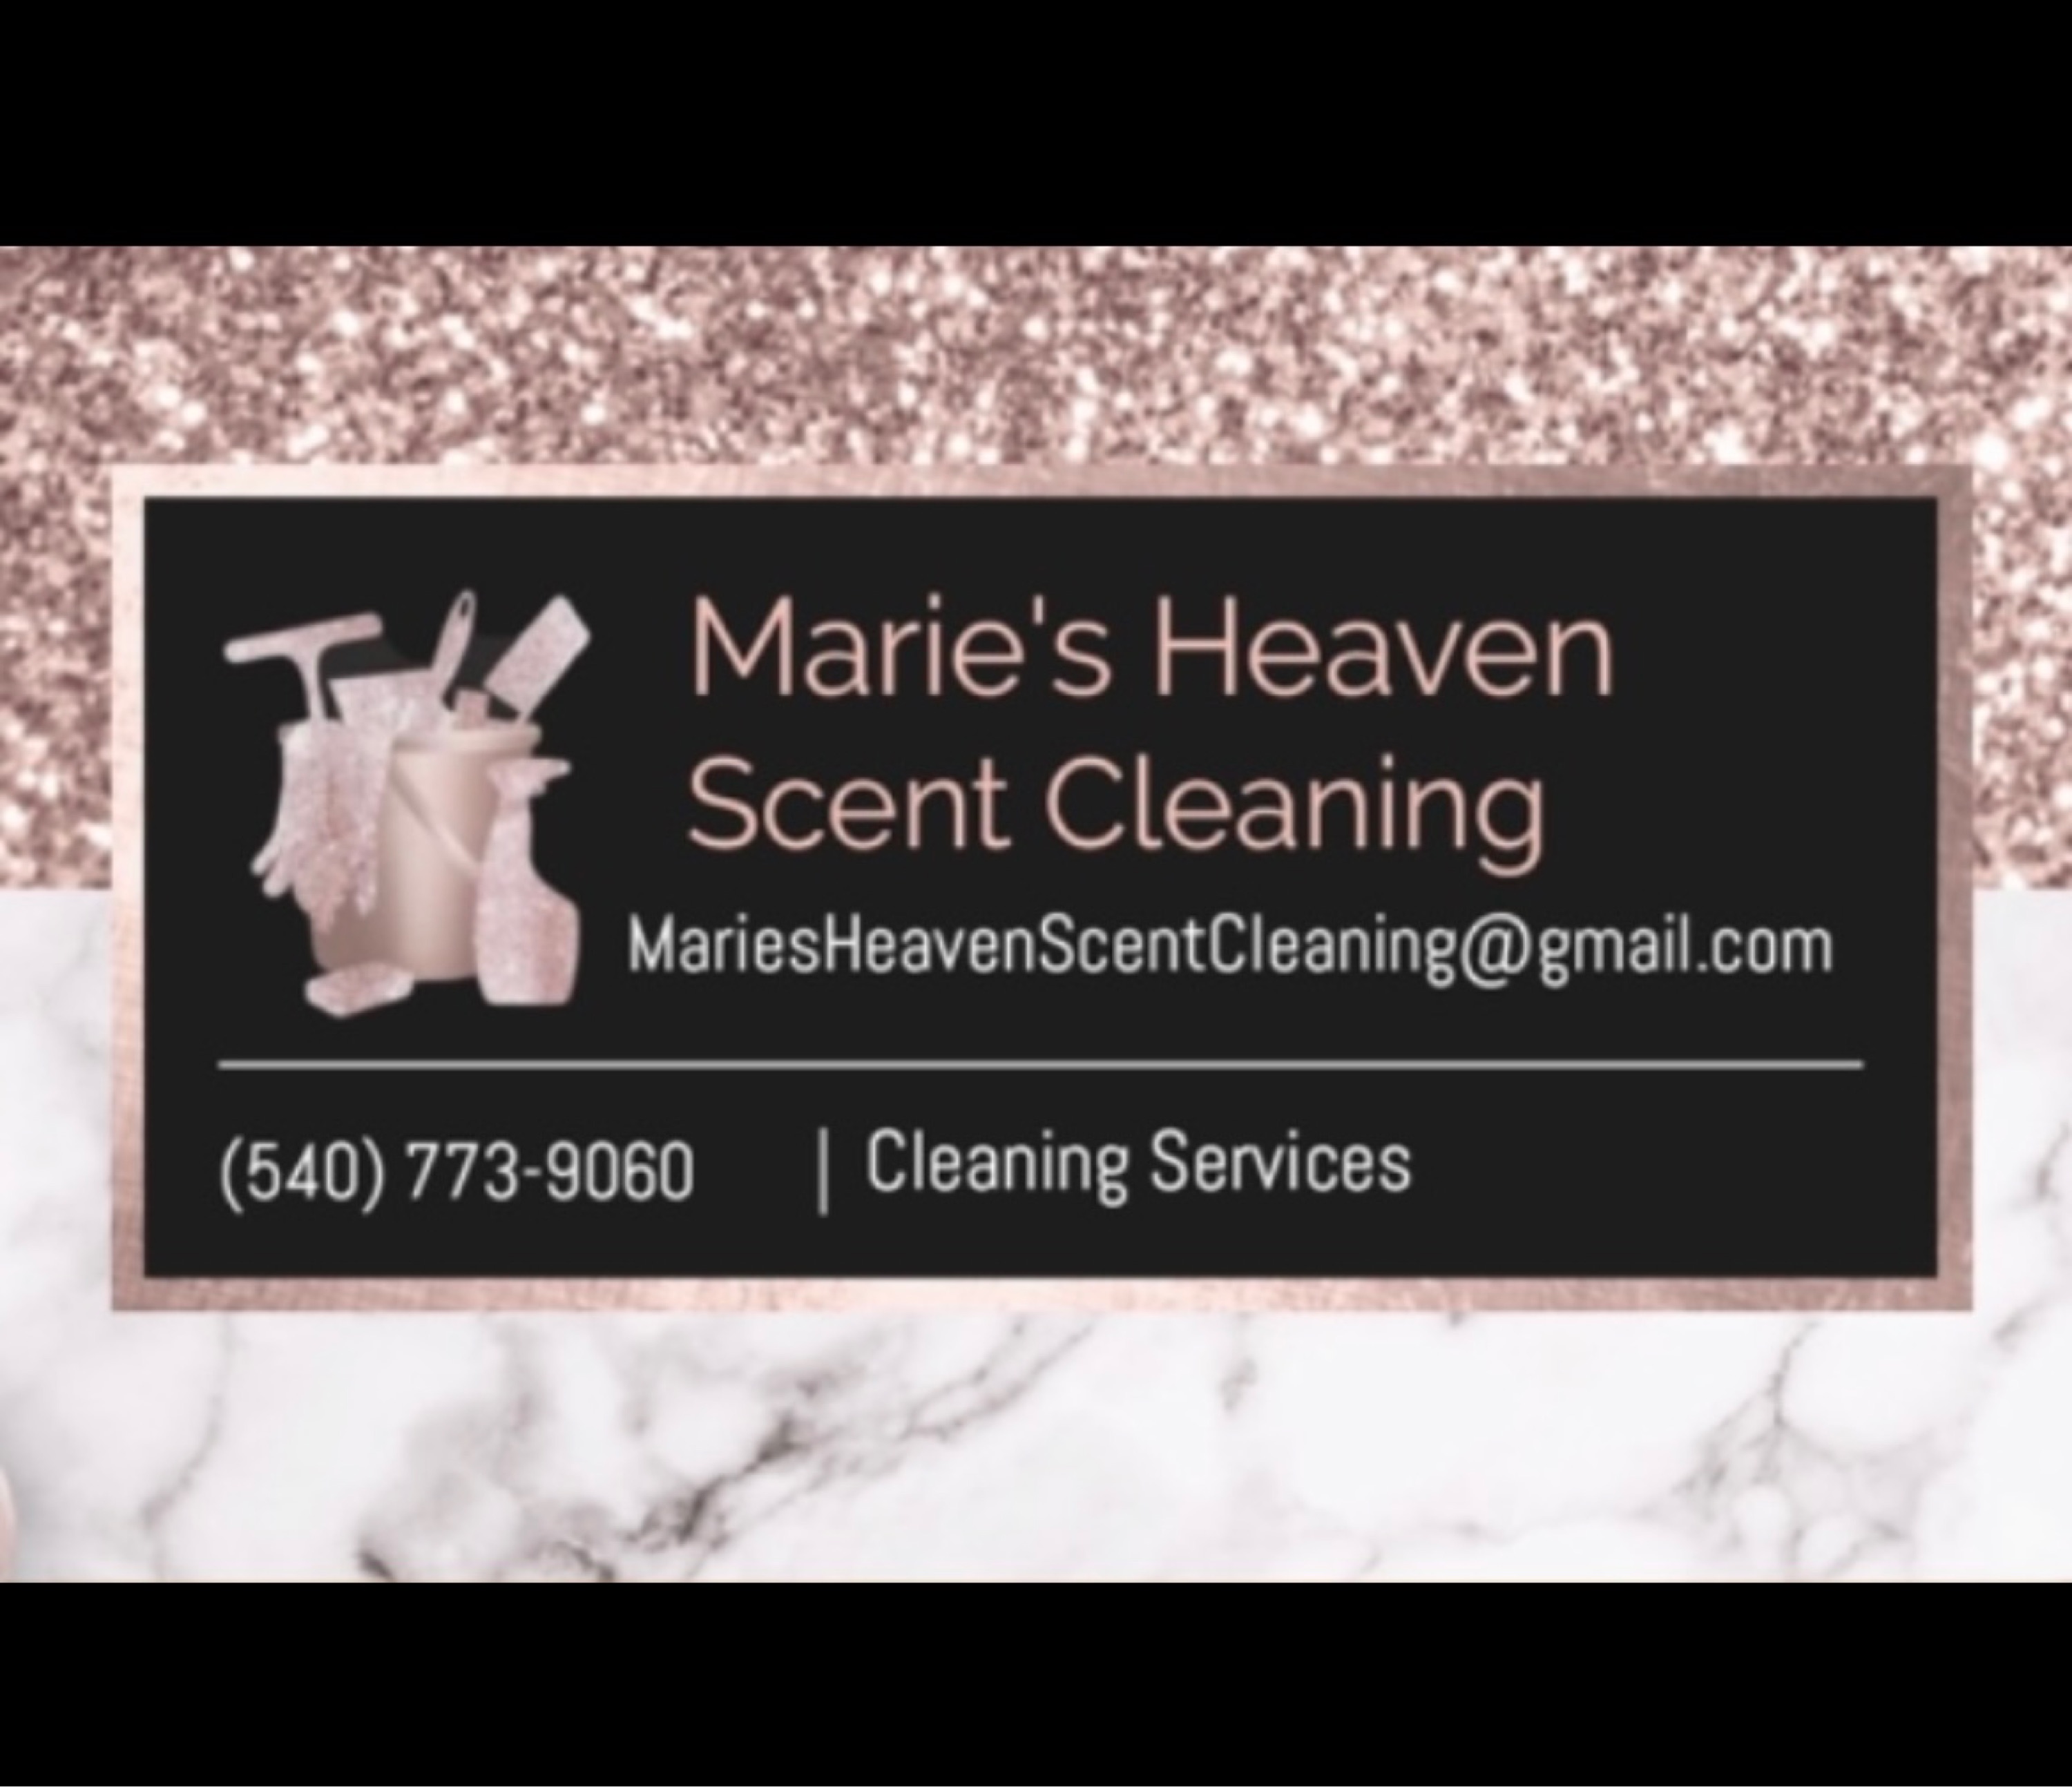 Marie's Heaven Scent Cleaning Logo